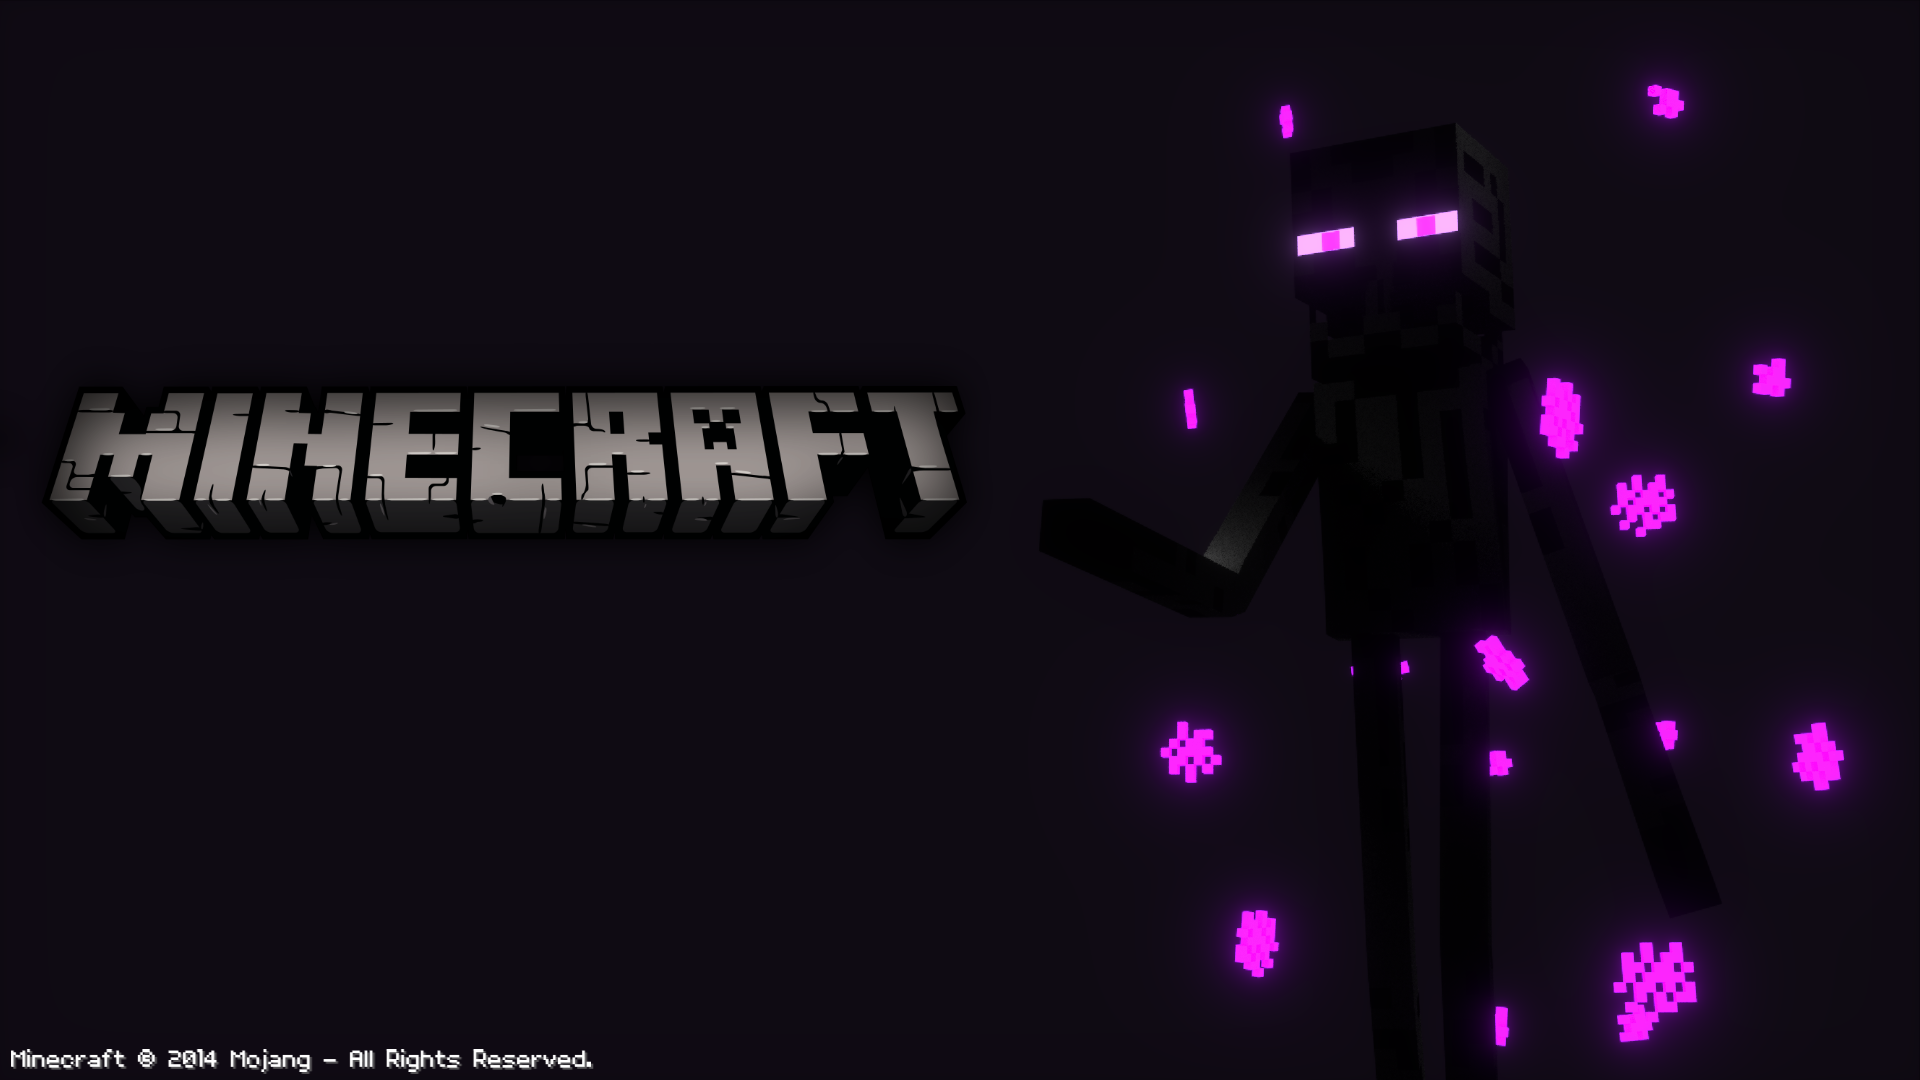 Minecraft End Wallpaper. Awesome